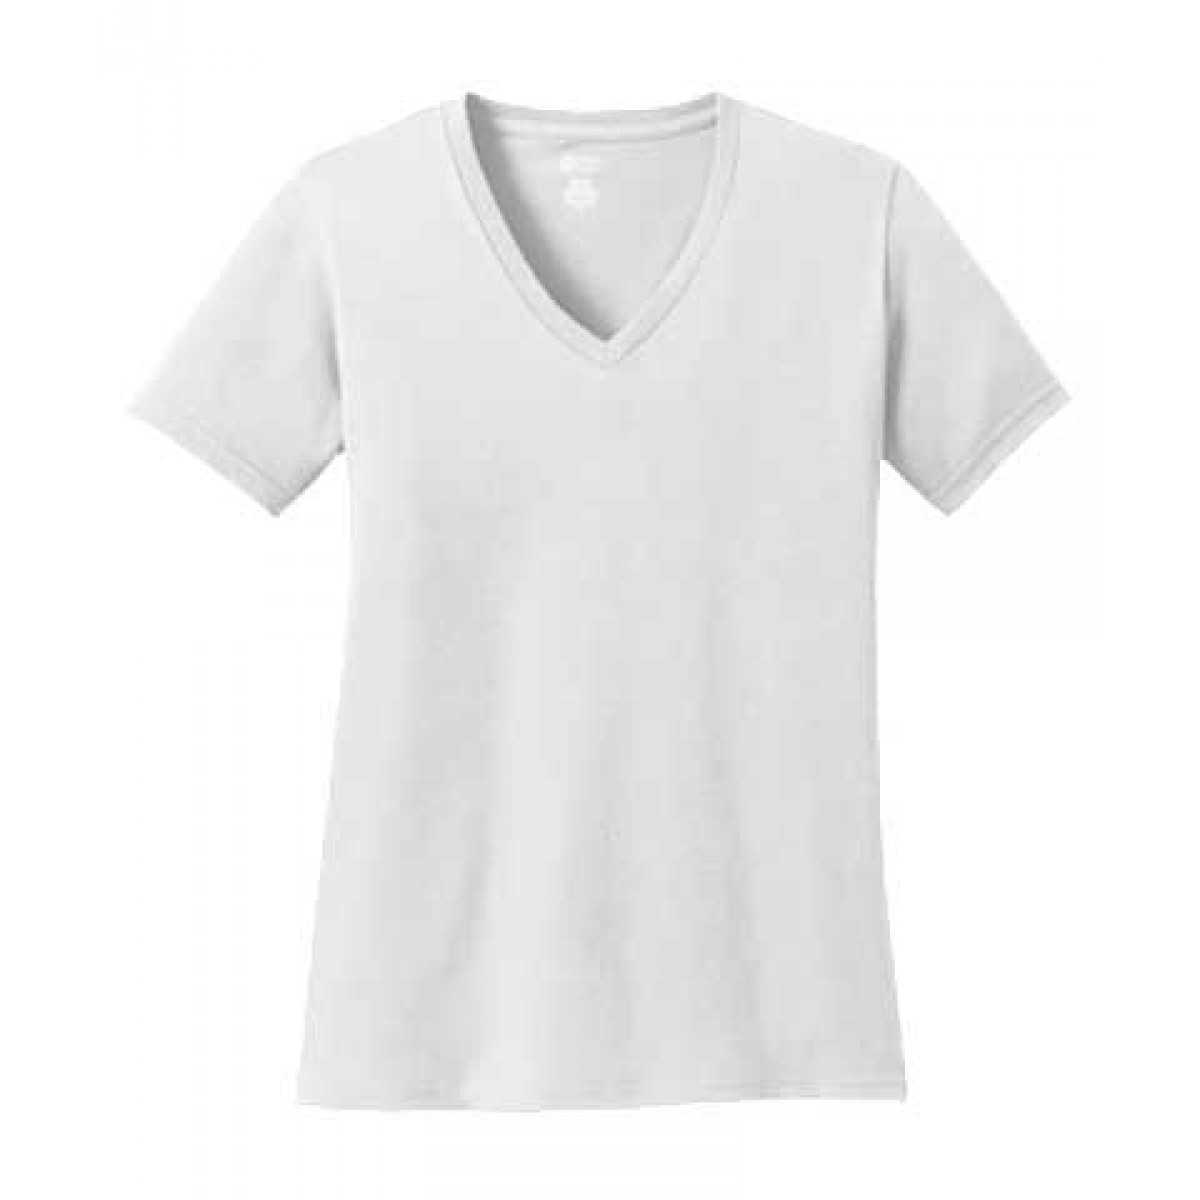 Ladies V-Neck Tee - Click for More Colors-White-S